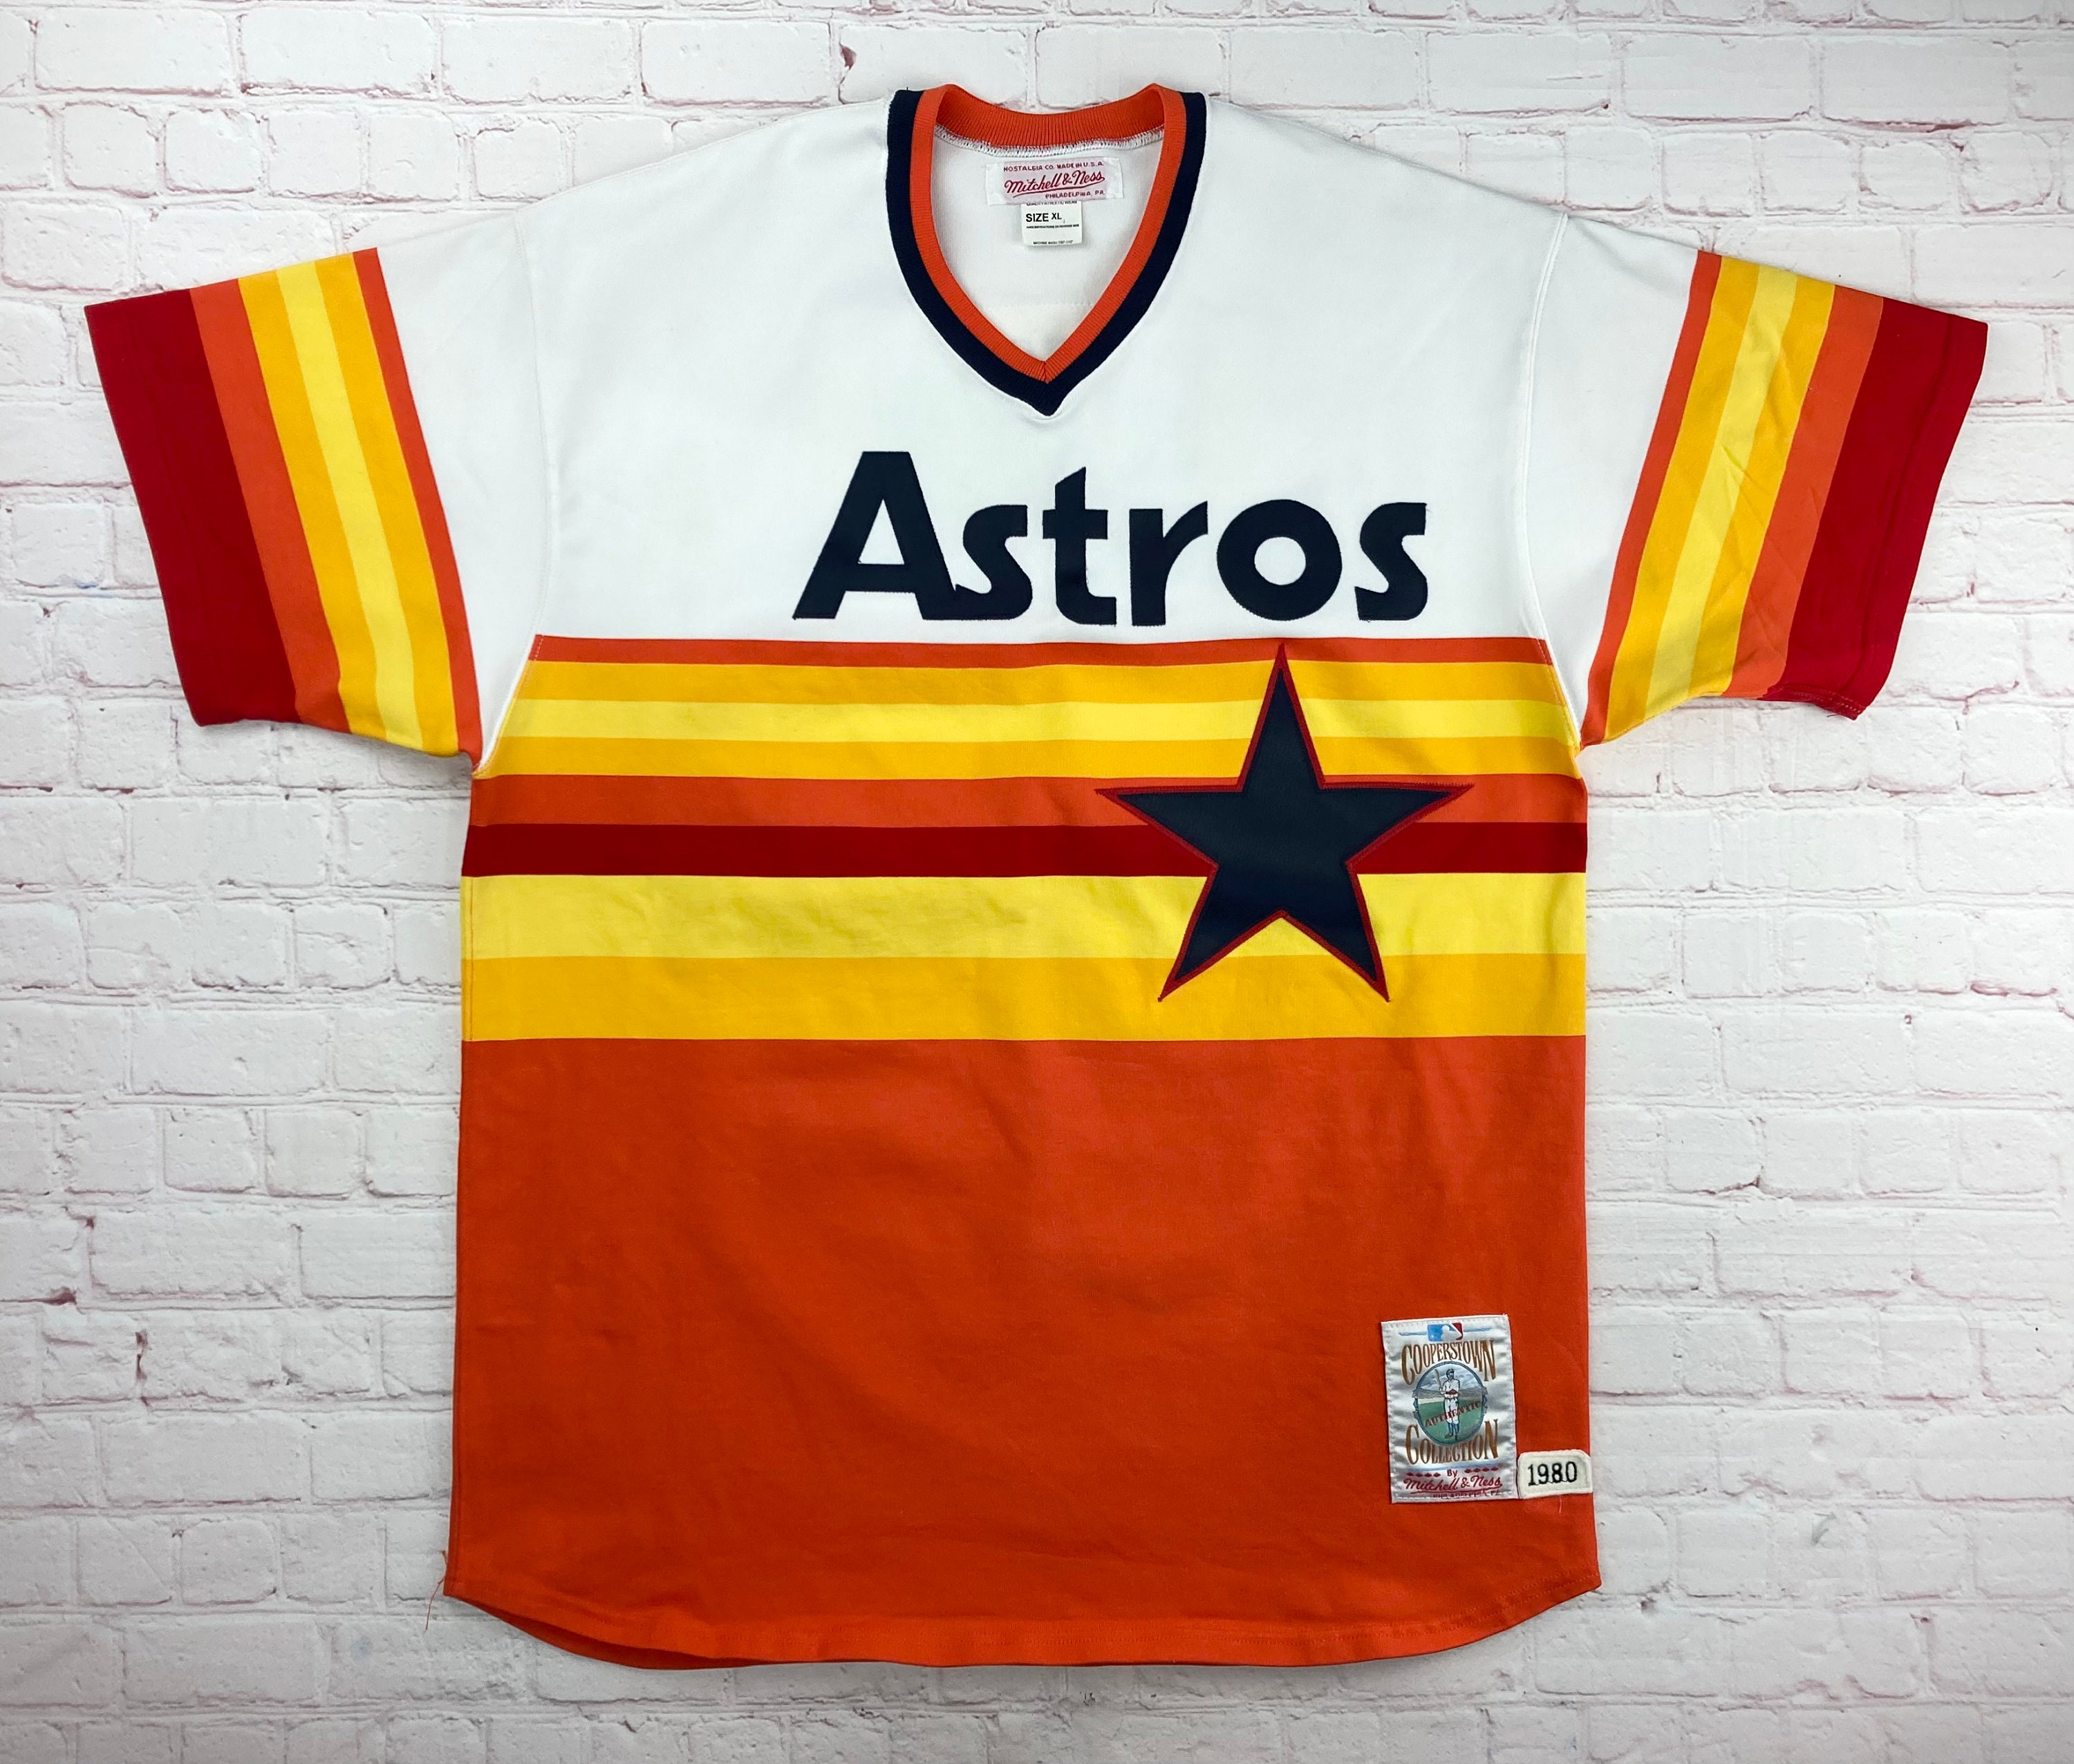 HOUSTON ASTROS NOLAN RYAN Jersey MITCHELL & NESS Size 56 COOPERSTOWN  COLLECTION